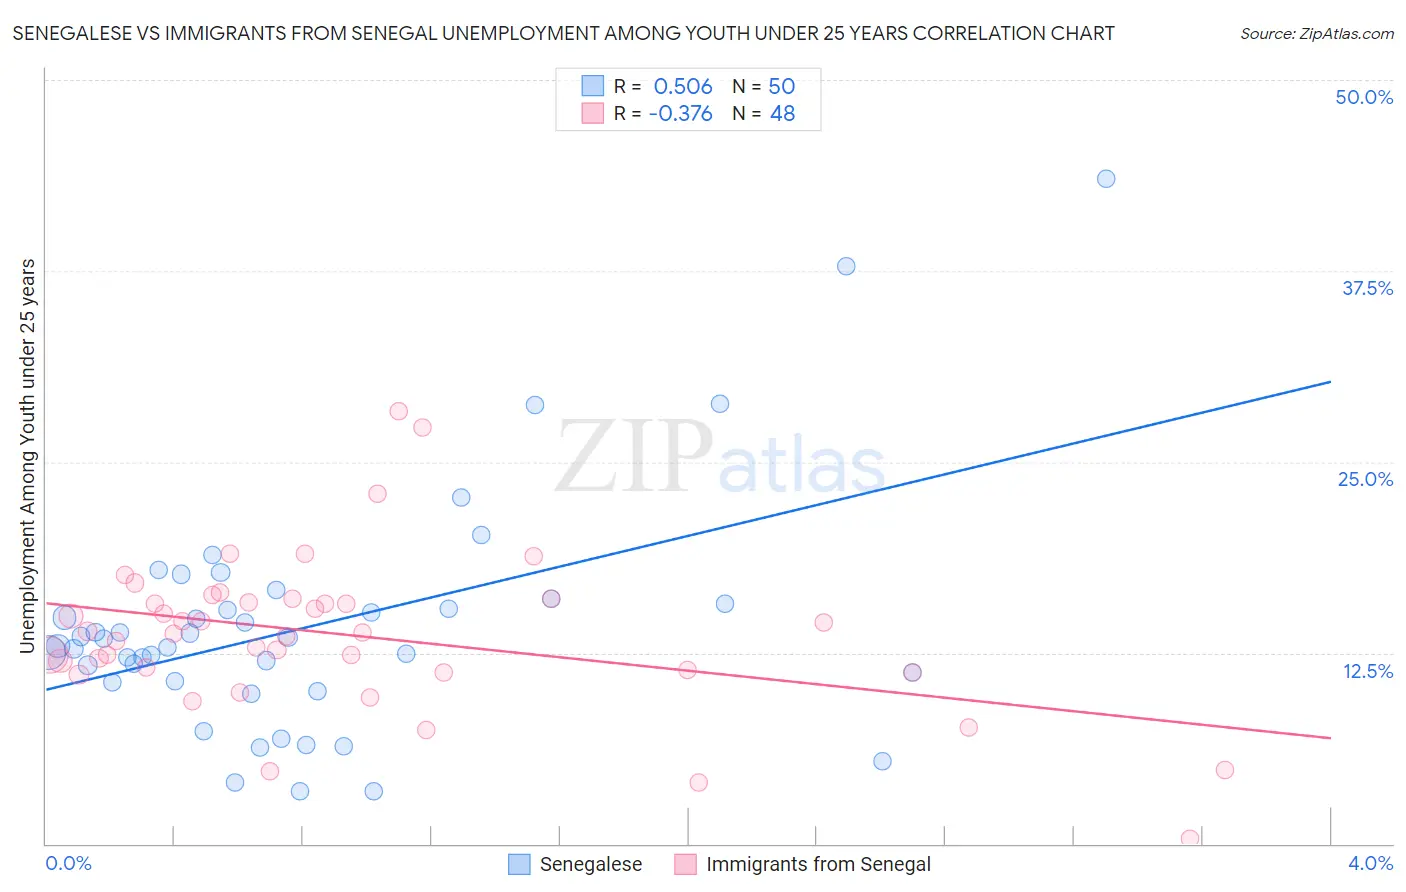 Senegalese vs Immigrants from Senegal Unemployment Among Youth under 25 years